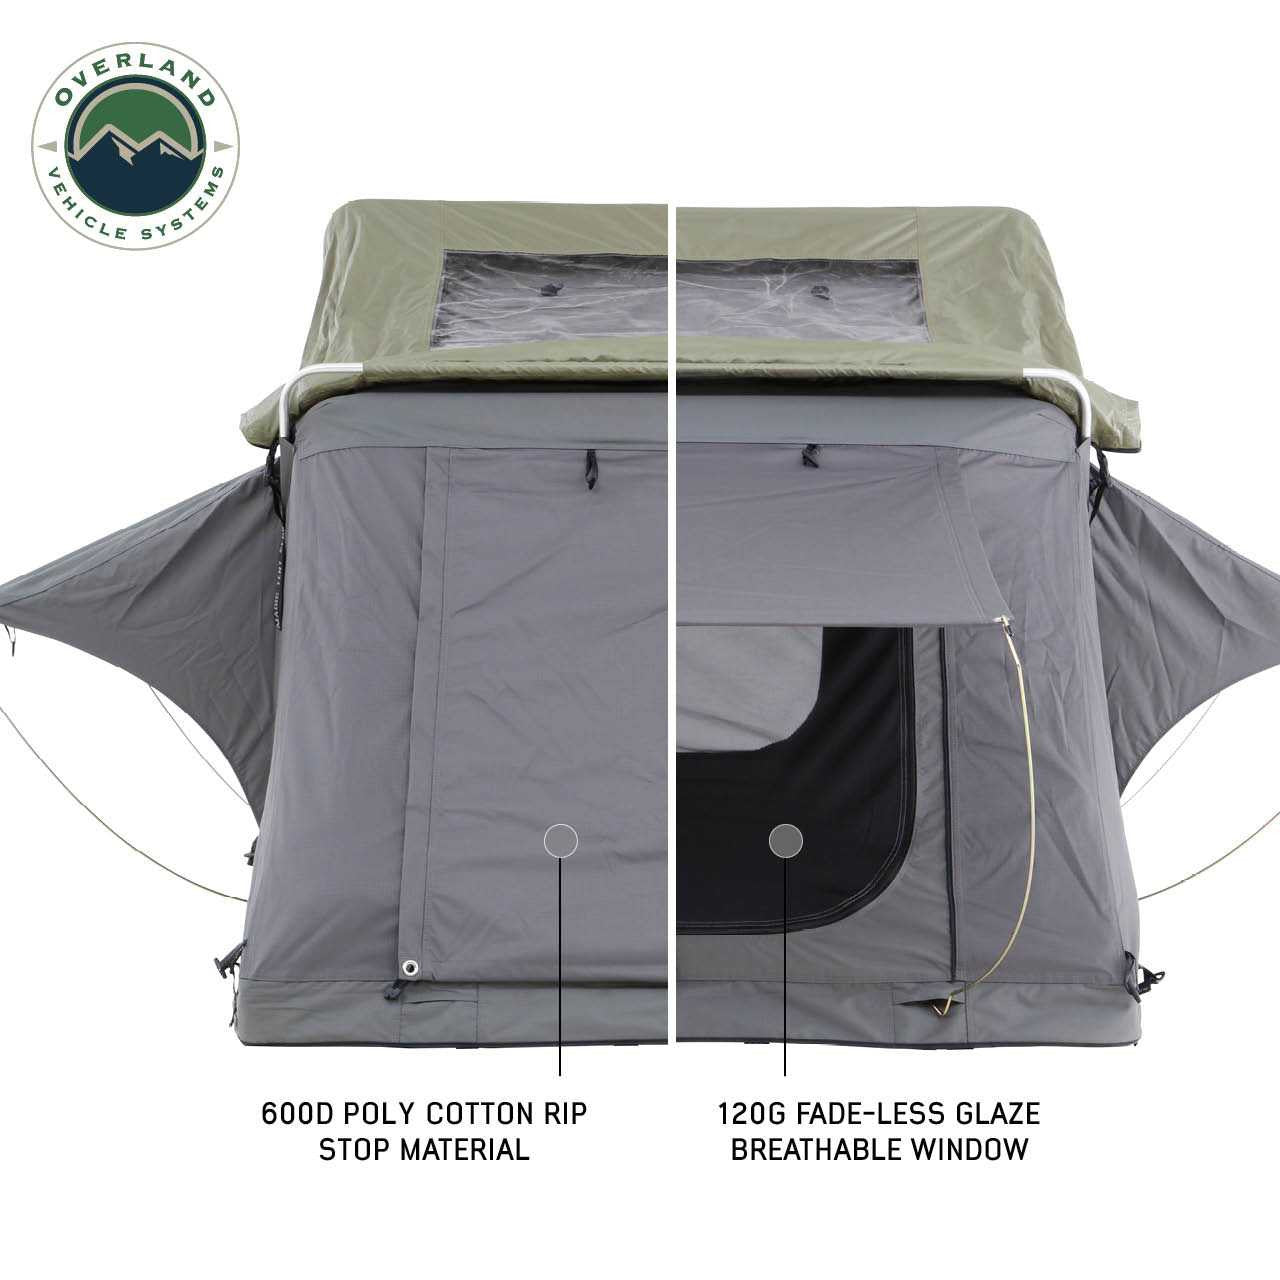 Visualization of Rip Stop and breath window features of the tent